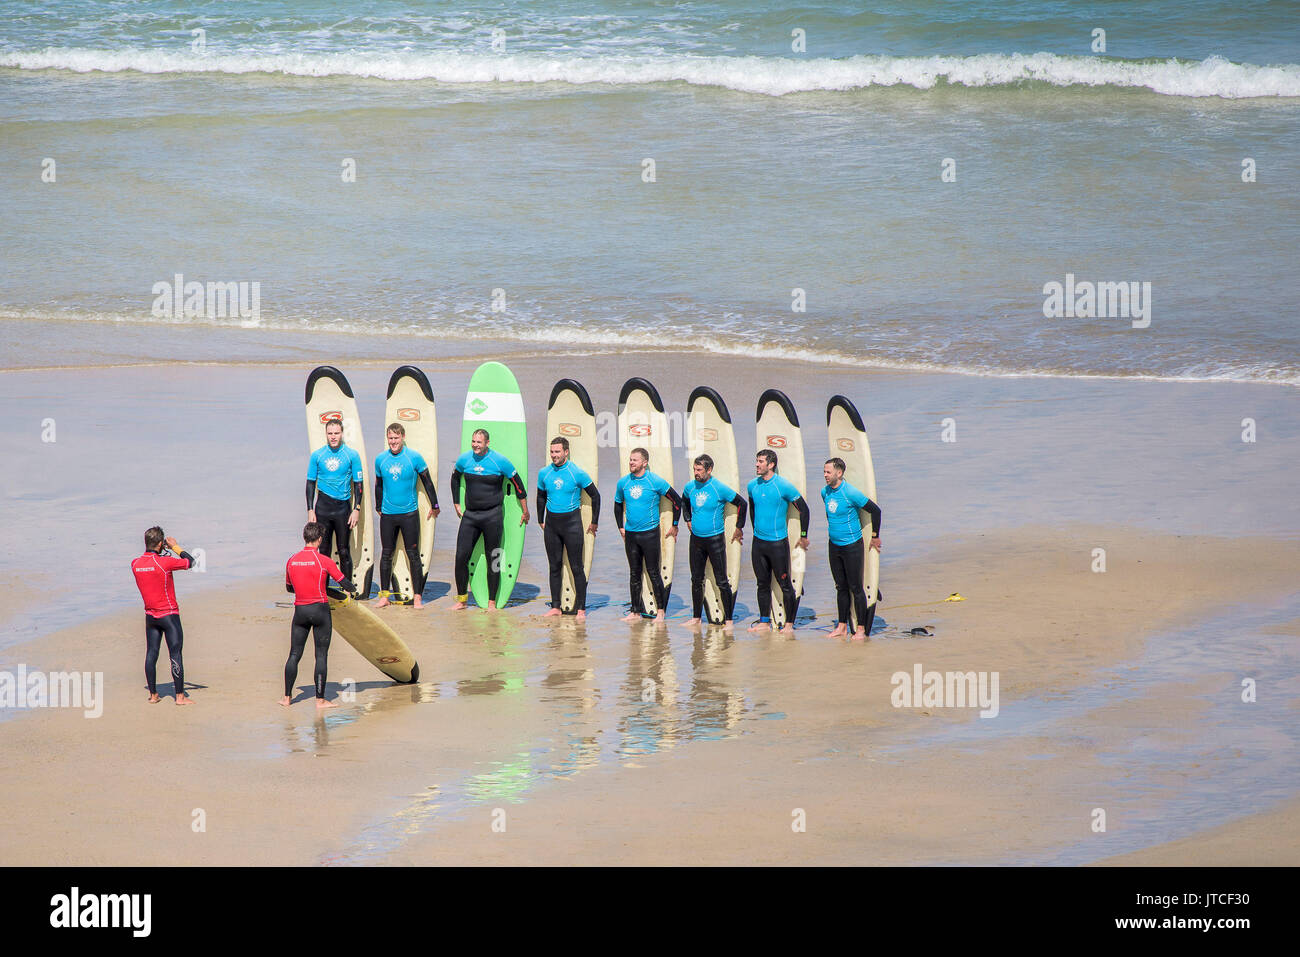 A group of surf school students posing for a photograph Great Western Beach in Newquay, Cornwall. Stock Photo